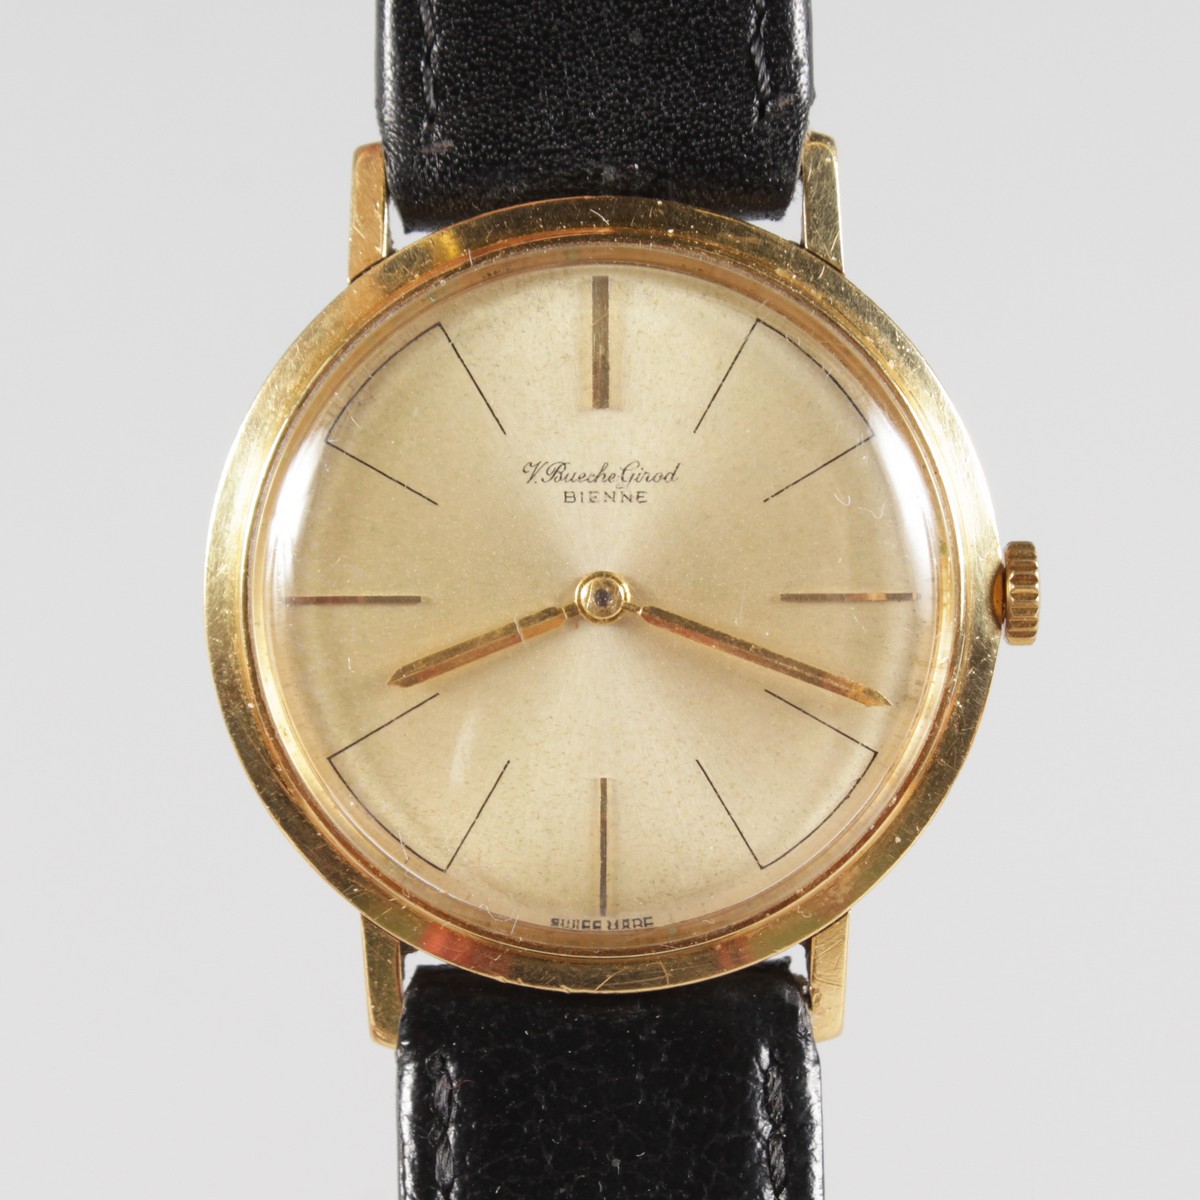 A GENTLEMAN'S V. BUECHE GIROD BIENNE 18CT YELLOW GOLD WRISTWATCH with leather strap, in a red box.